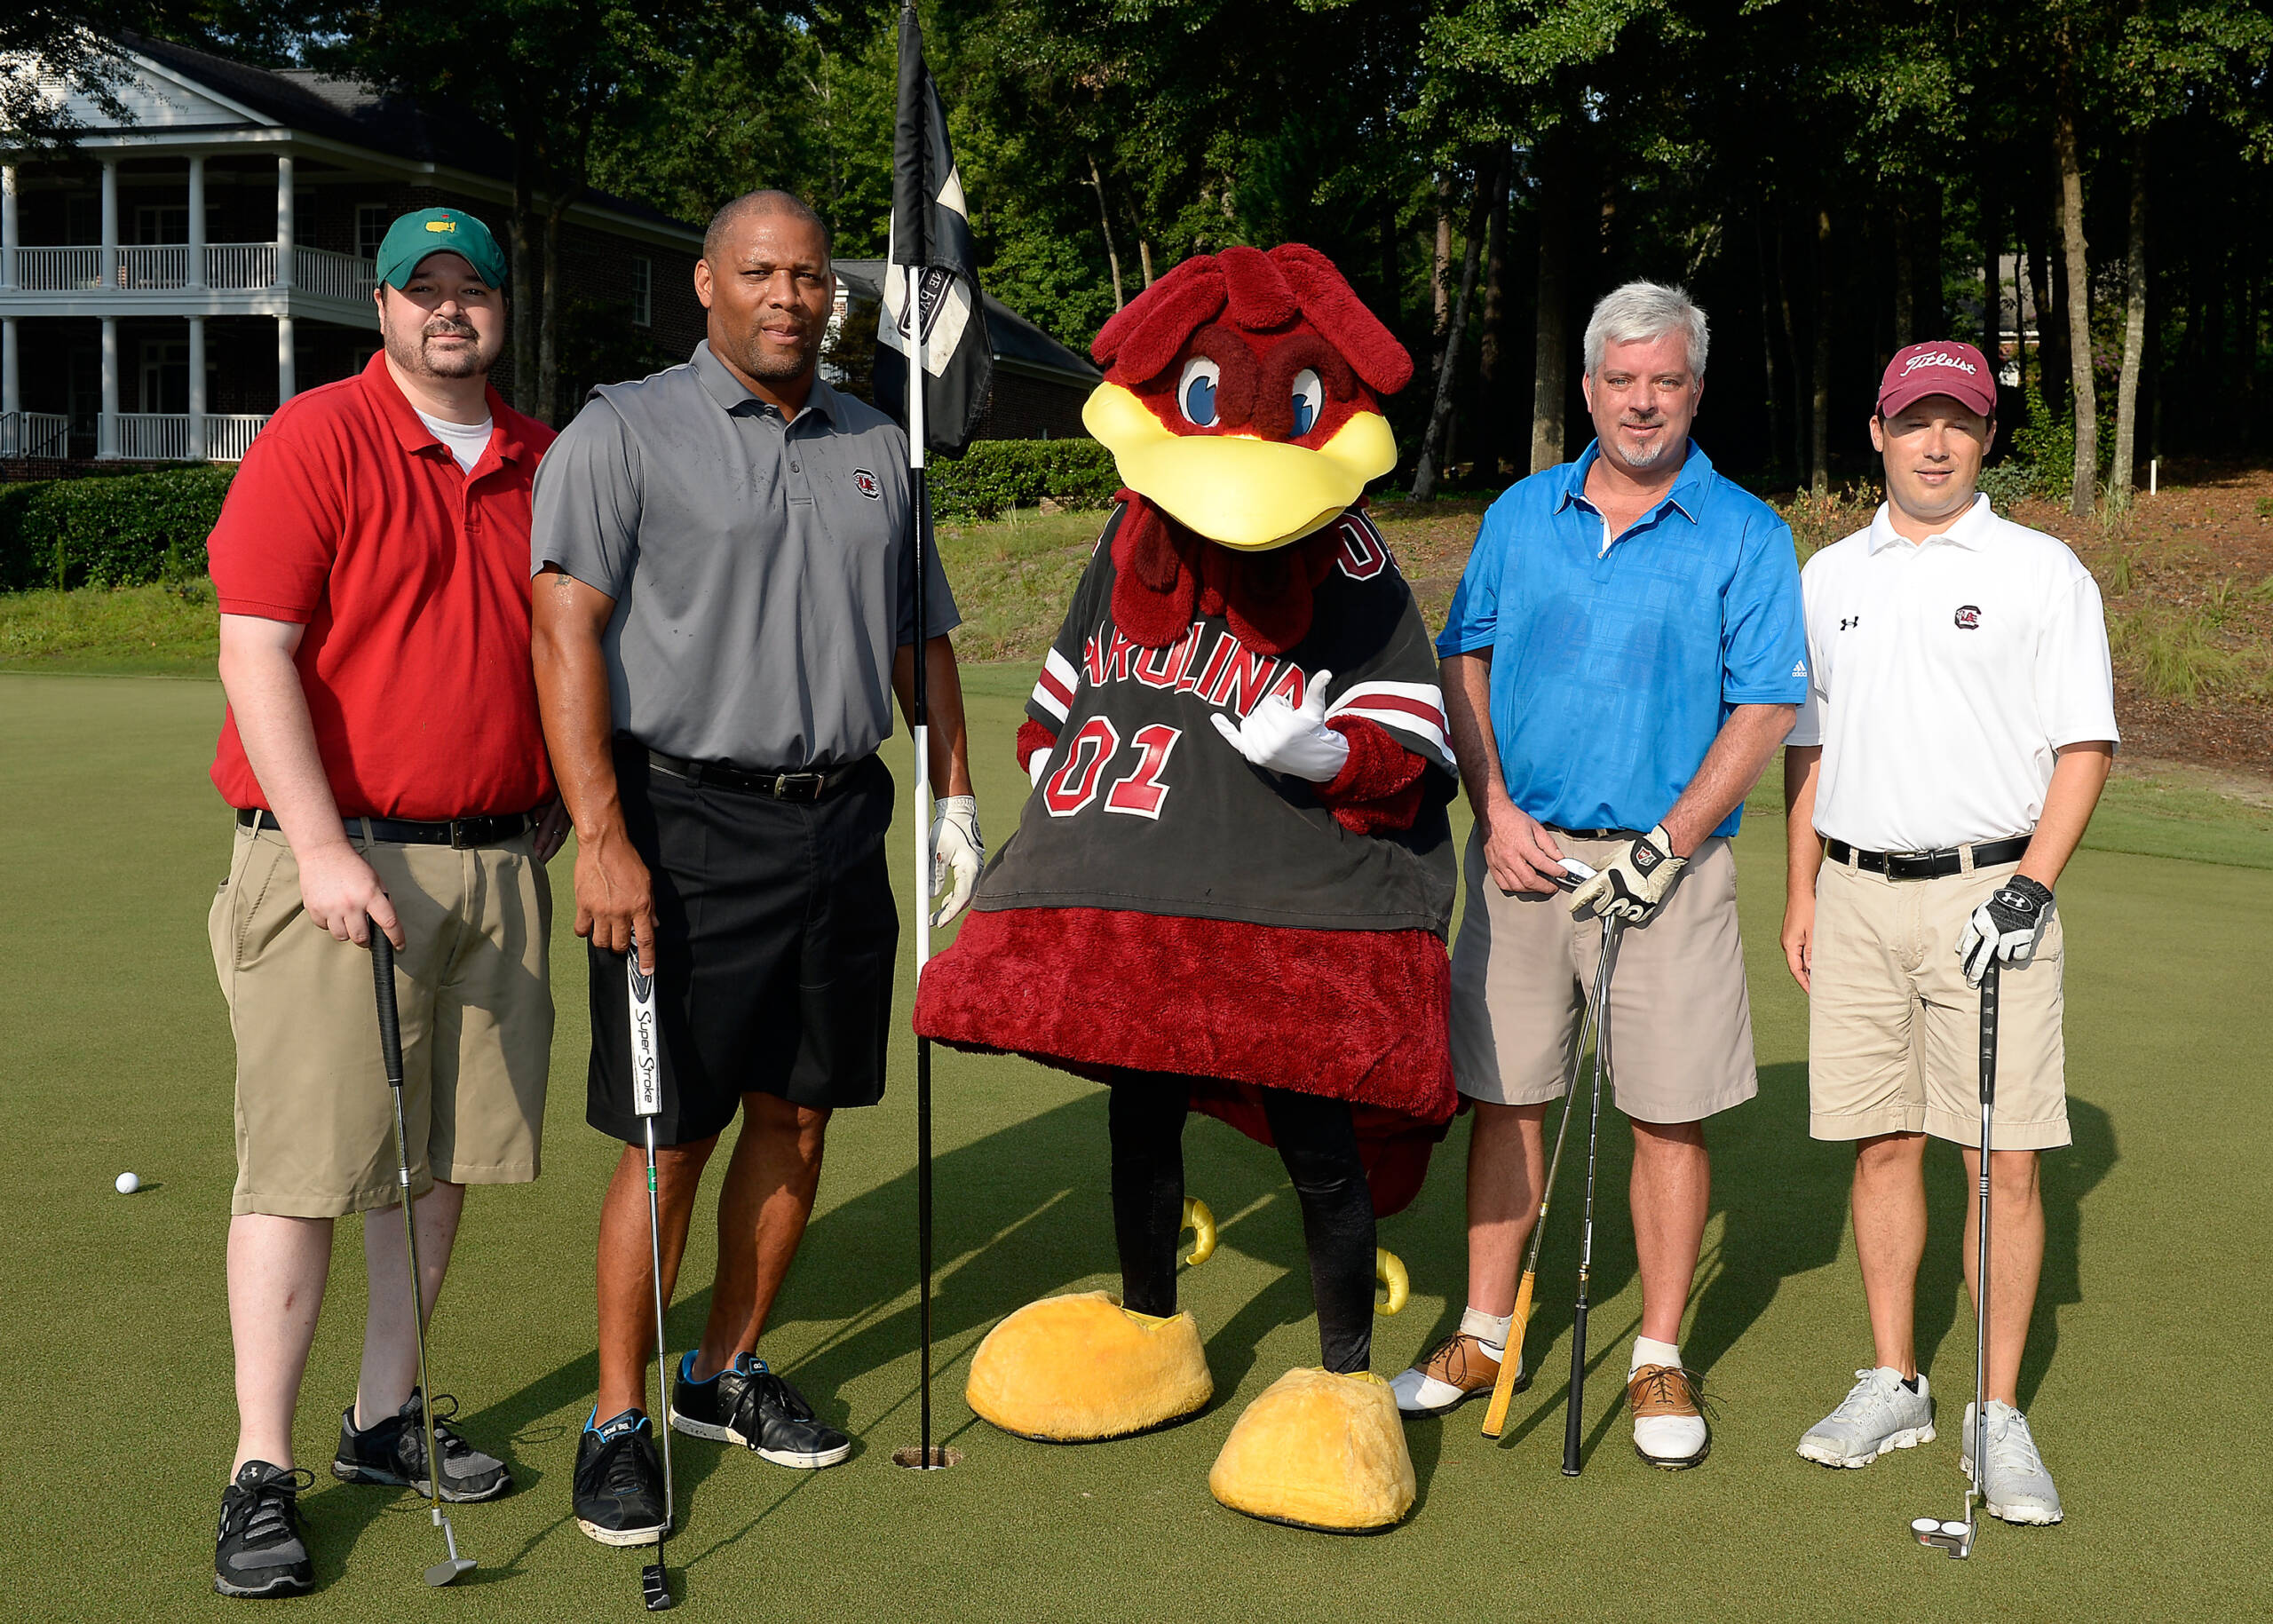 2015 SC Media Golf Outing